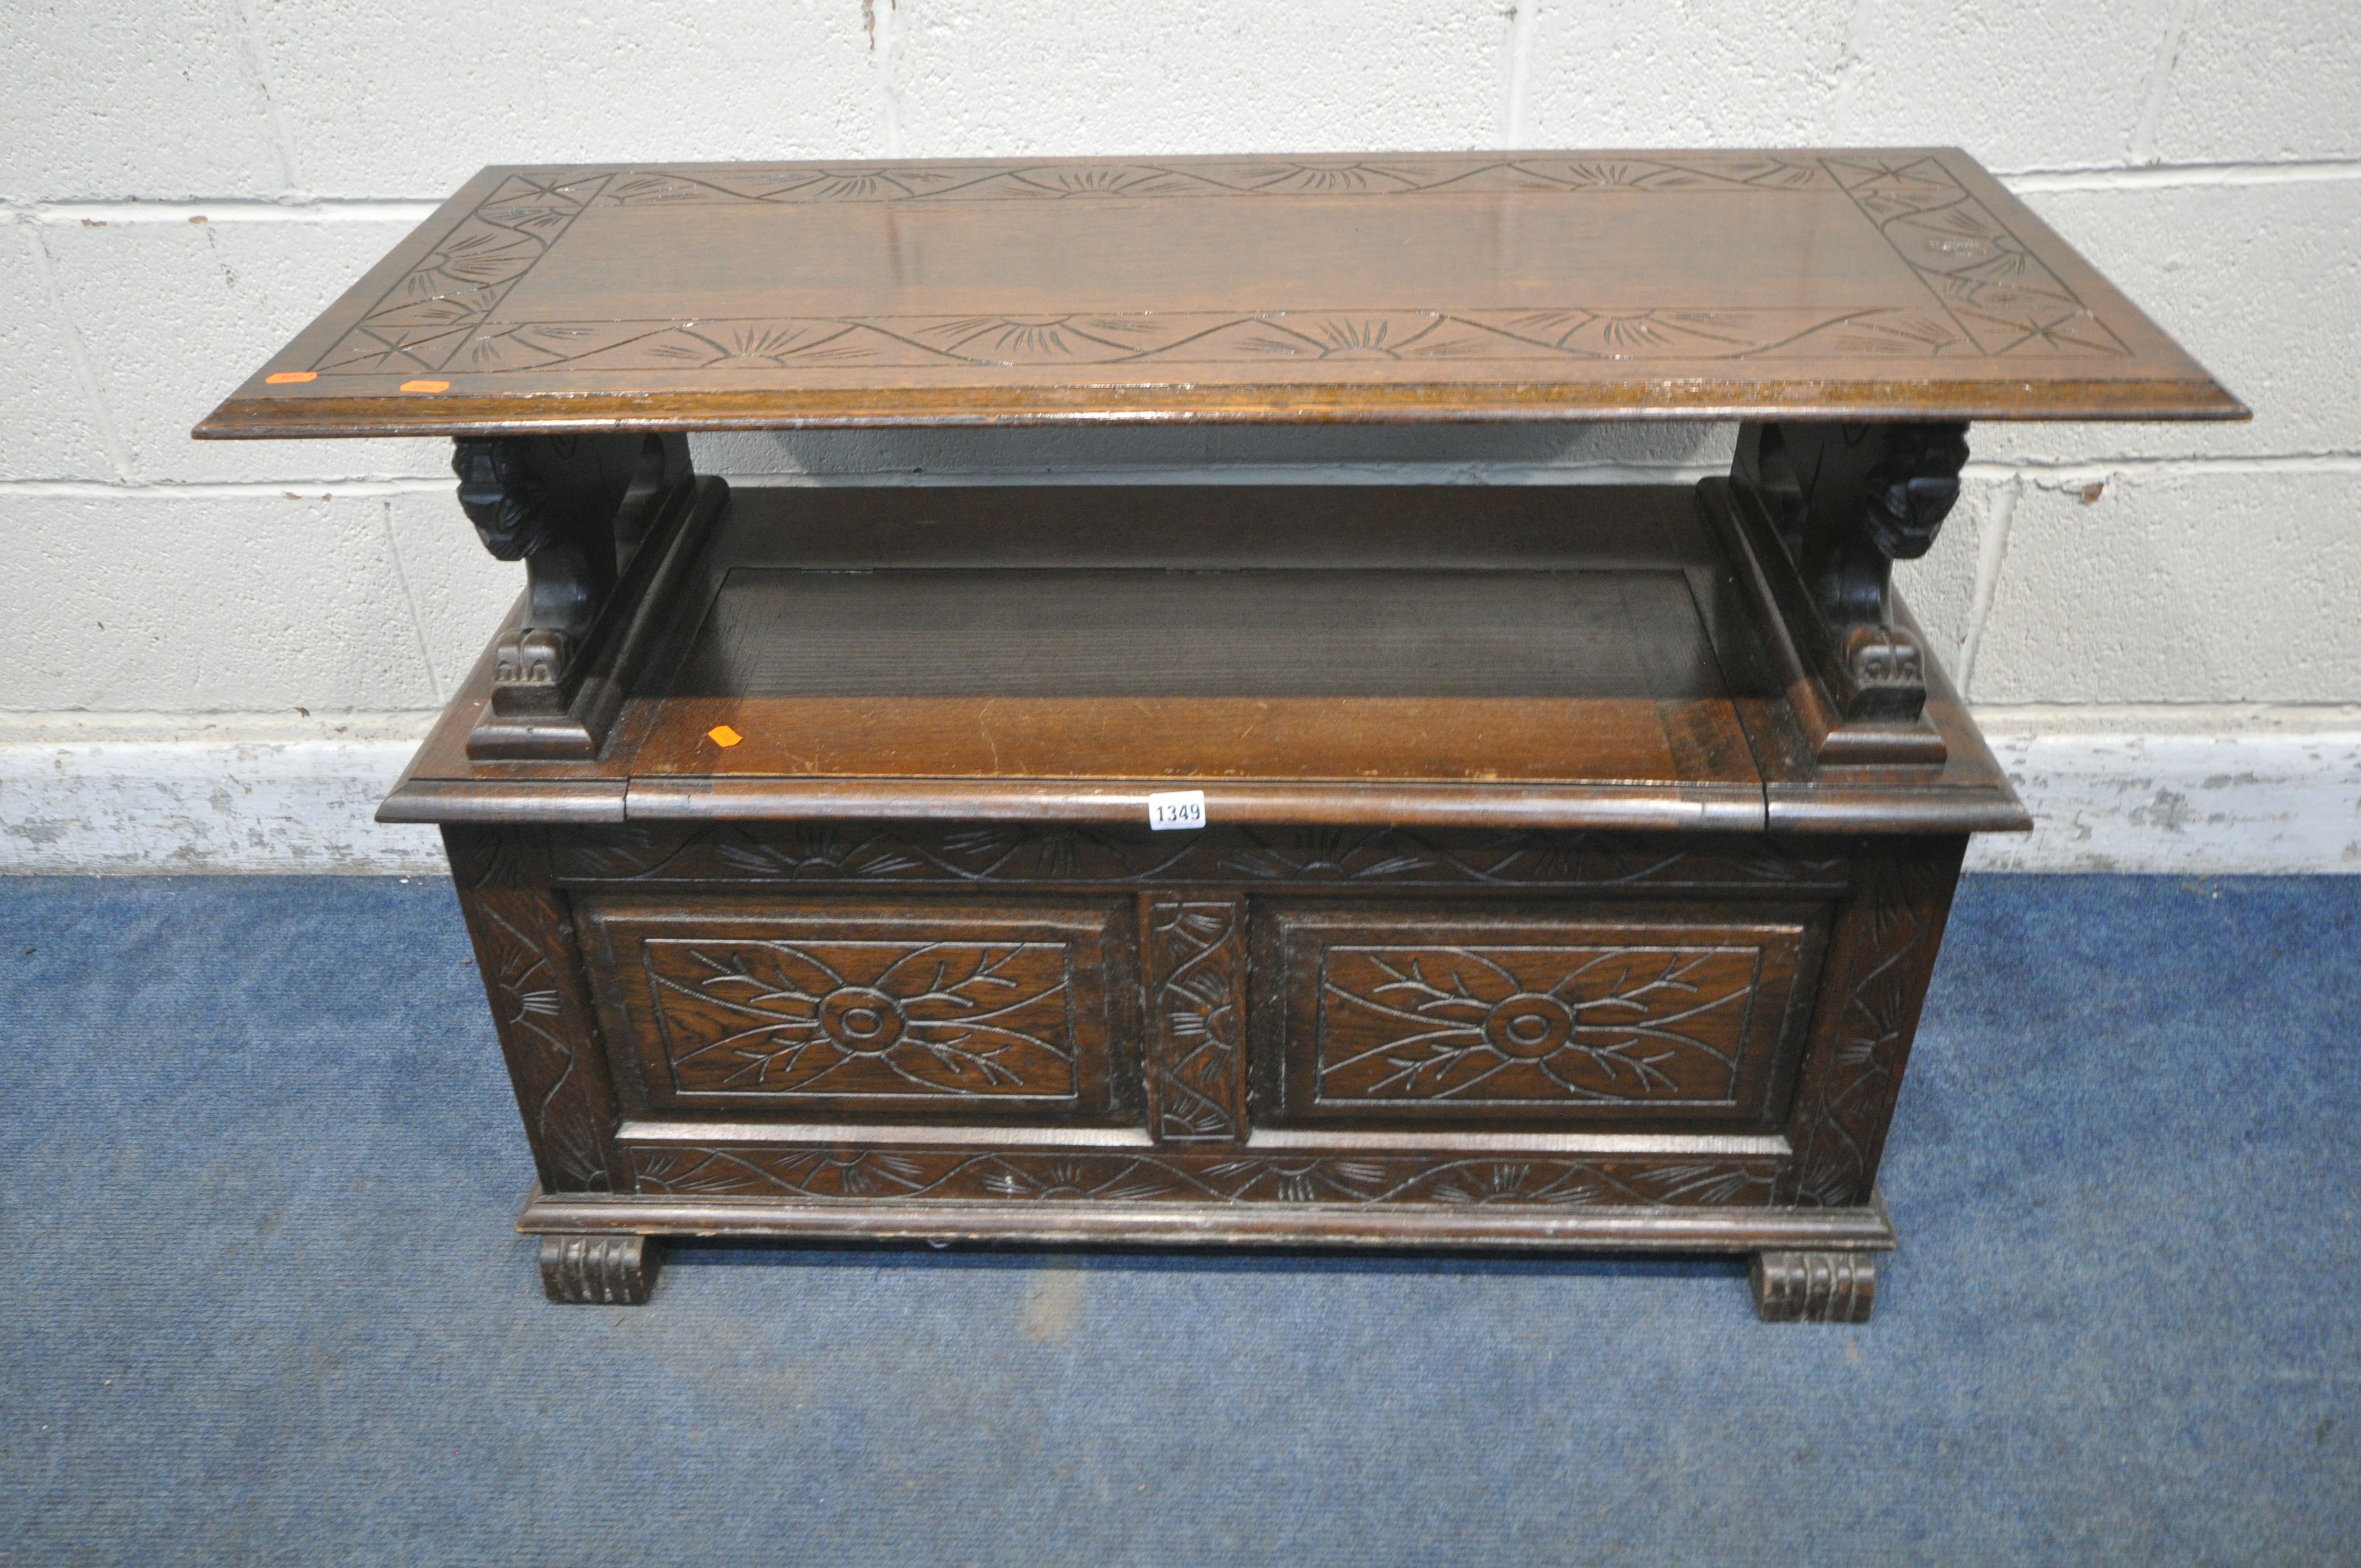 AN EARLY 20TH CENTURY OAK MONKS BENCH, with a rise and fall backrest / surface, lion armrests and